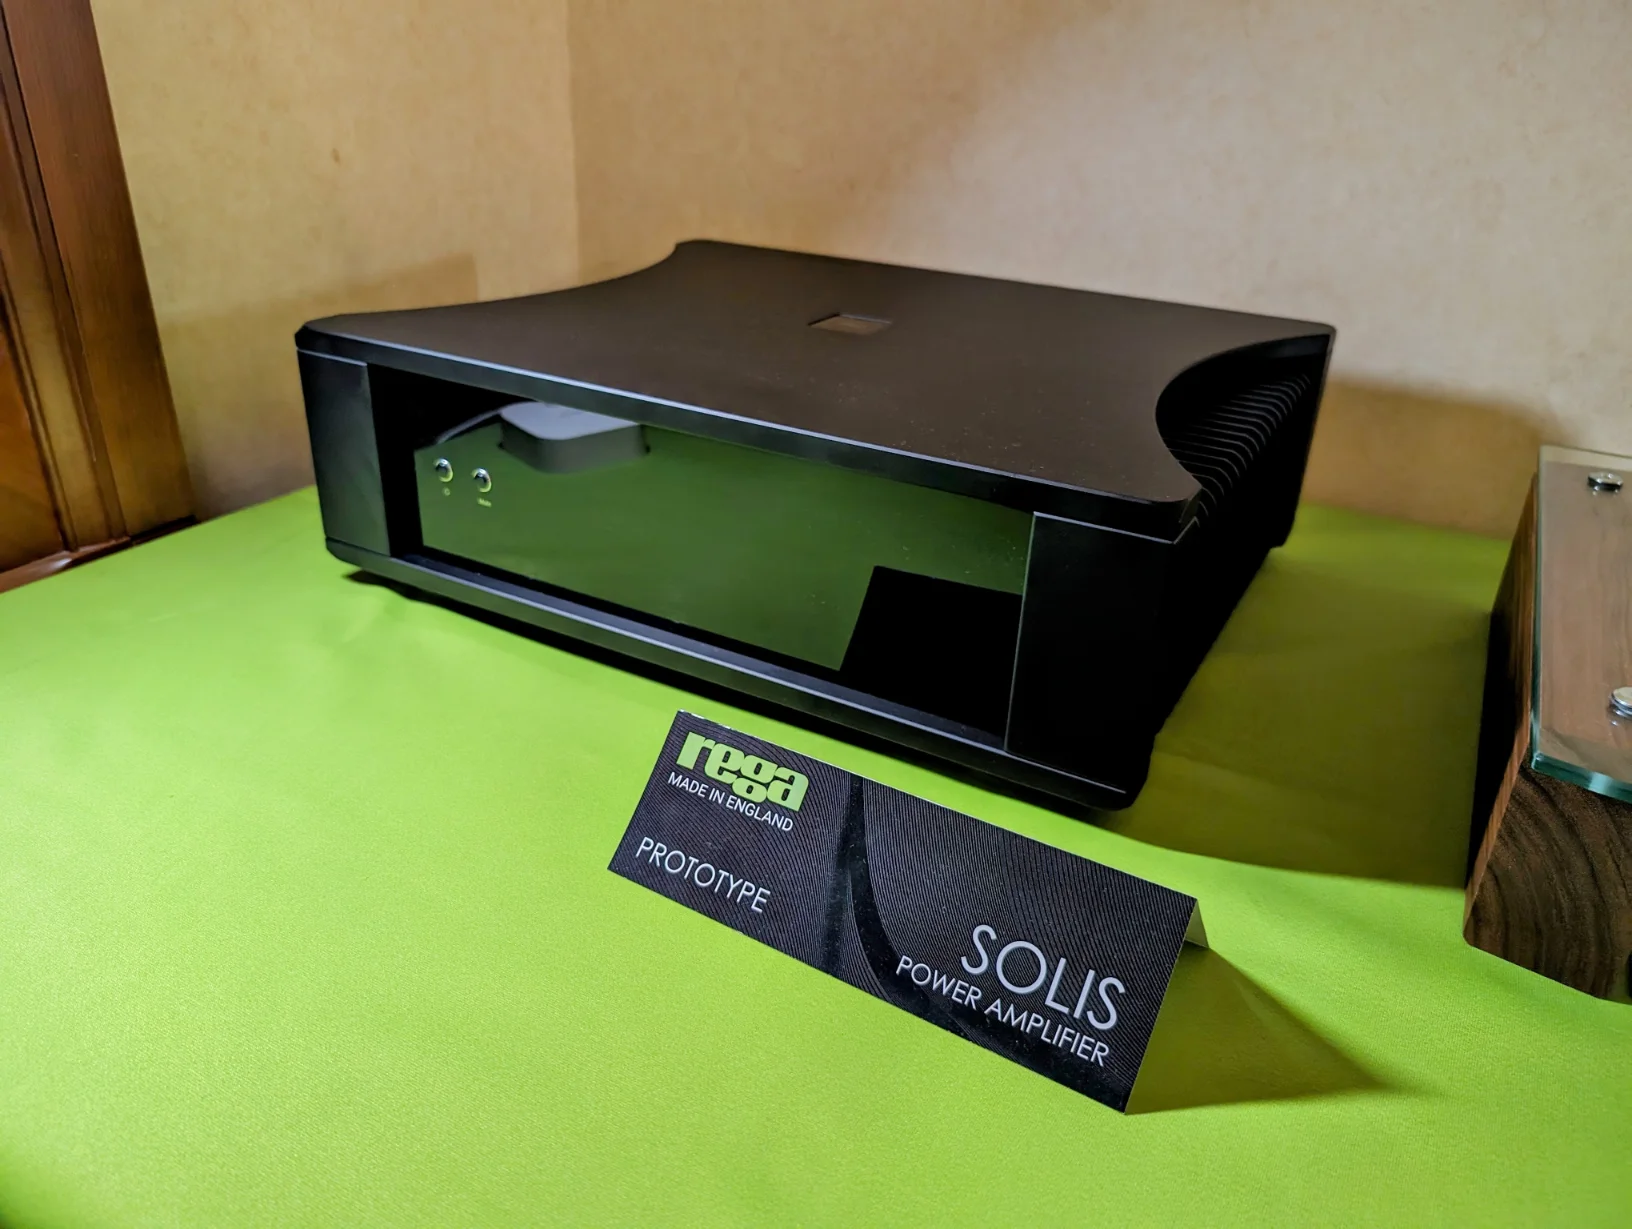 The matching Solis power amplifier. A chunky box compared to what we know of Rega, looking forward to trying some demanding speakers with this one.